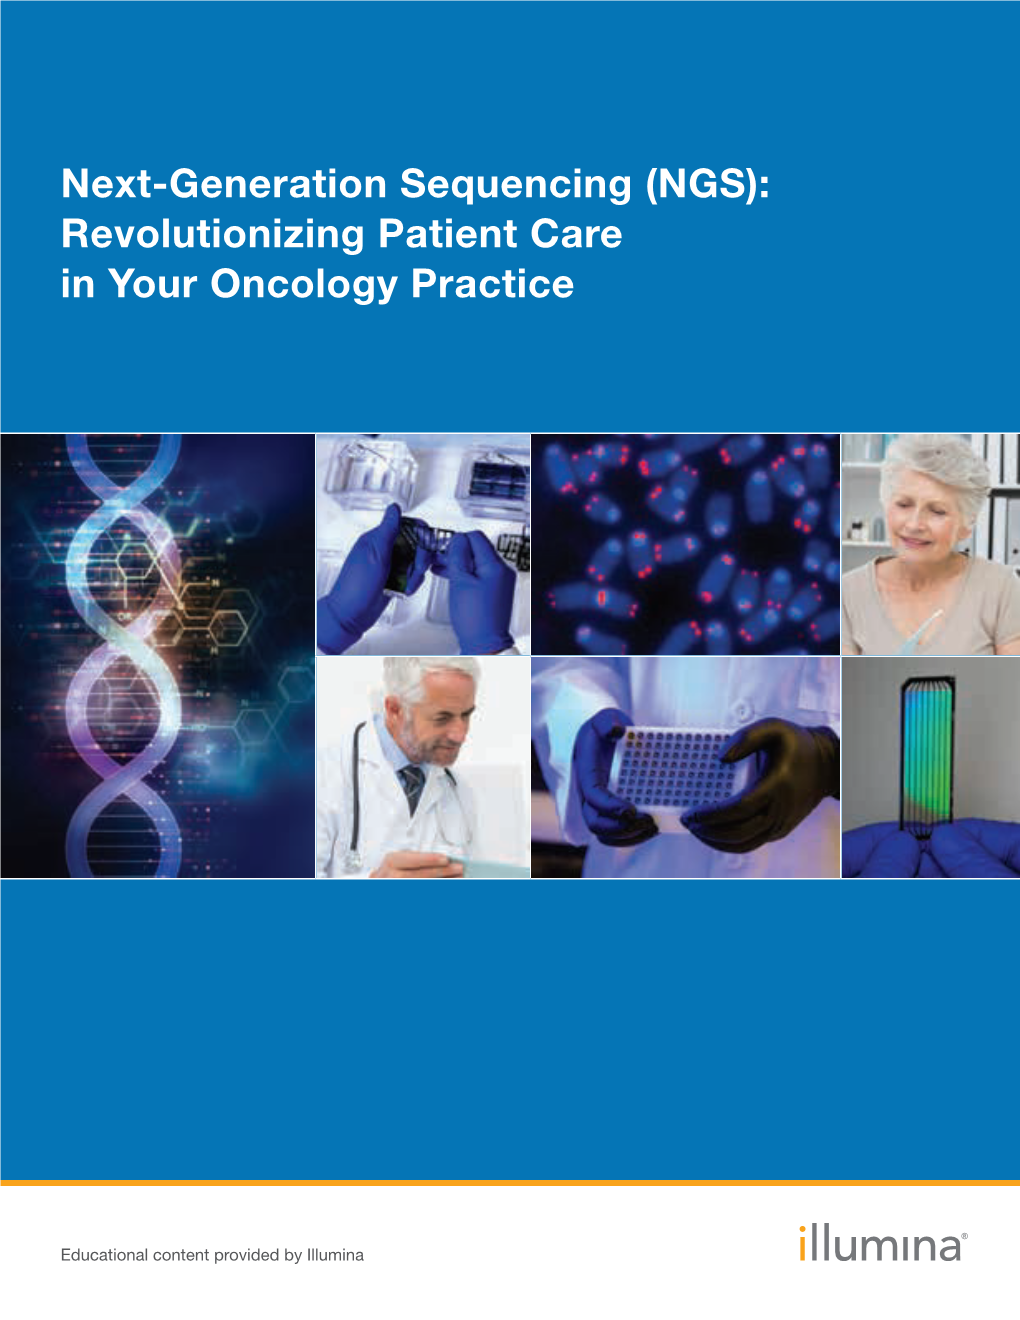 (NGS): Revolutionizing Patient Care in Your Oncology Practice